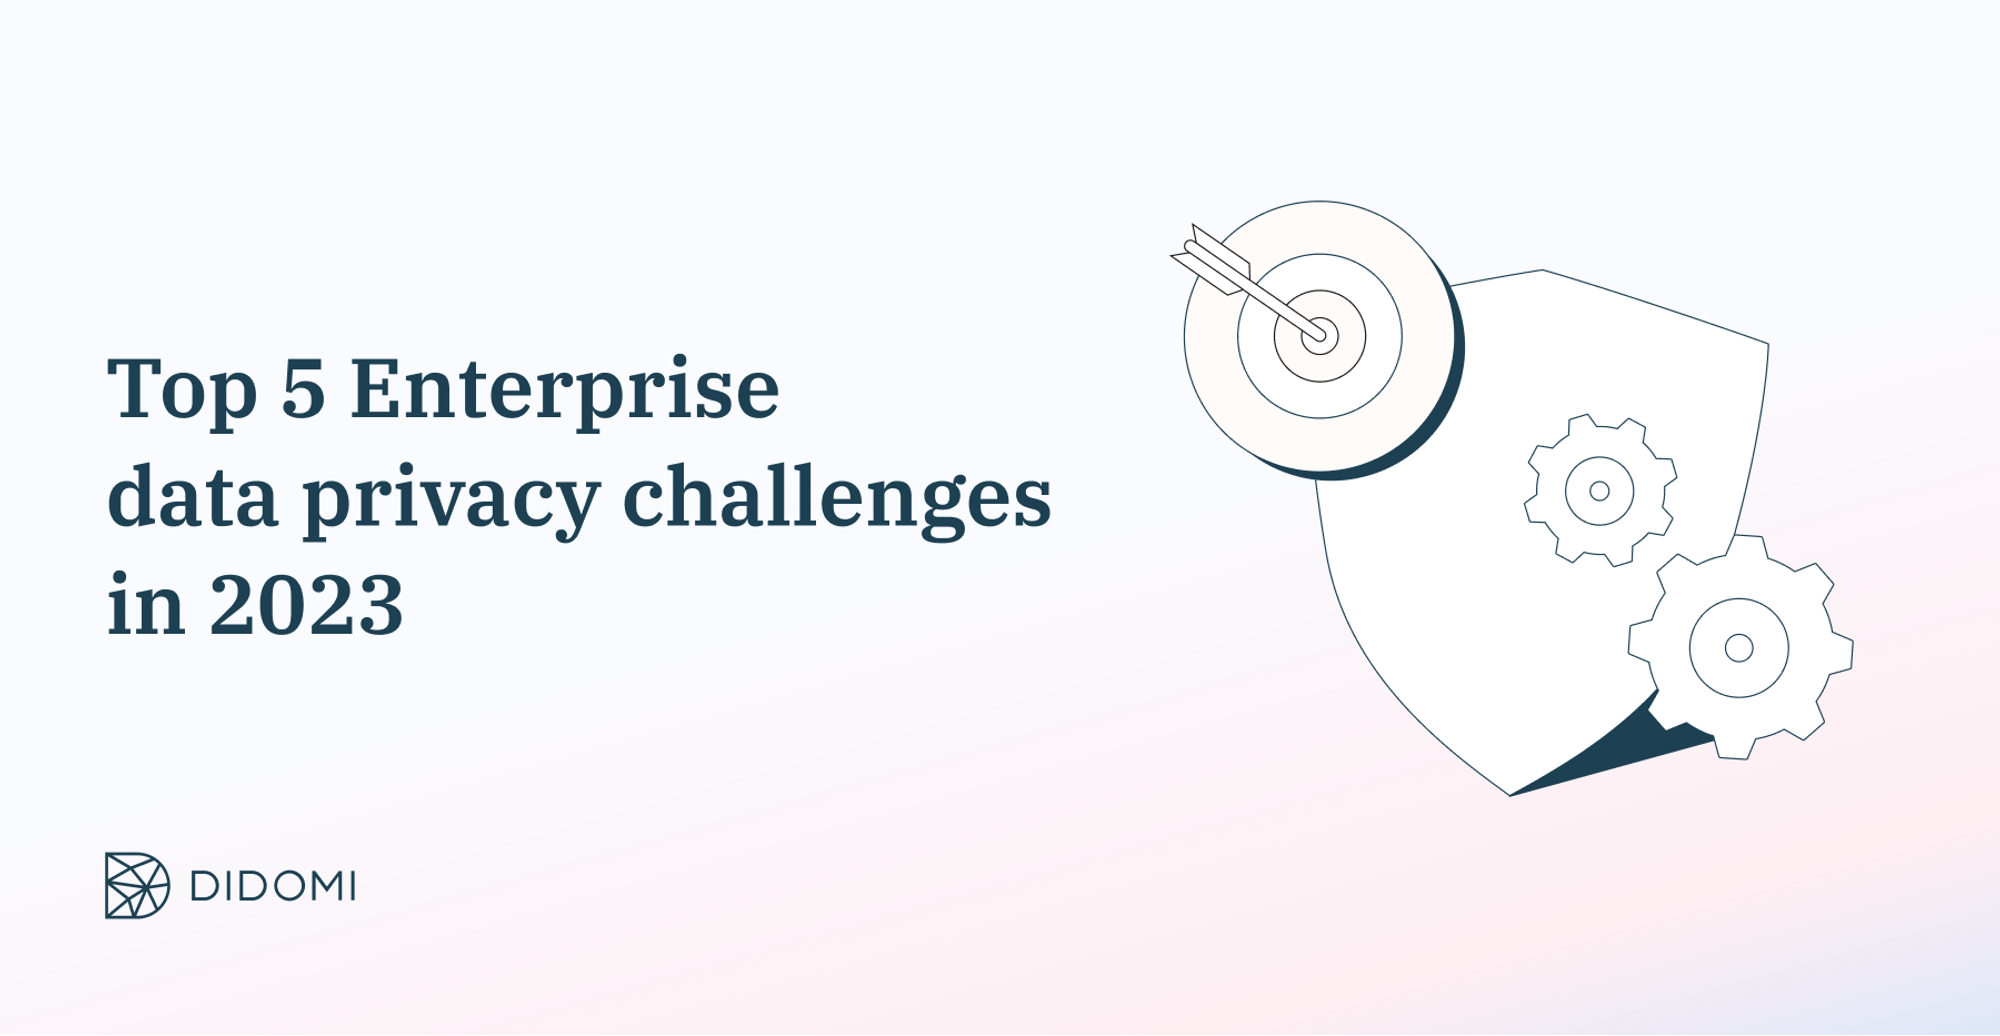 Top 5 Enterprise data privacy challenges in 2023